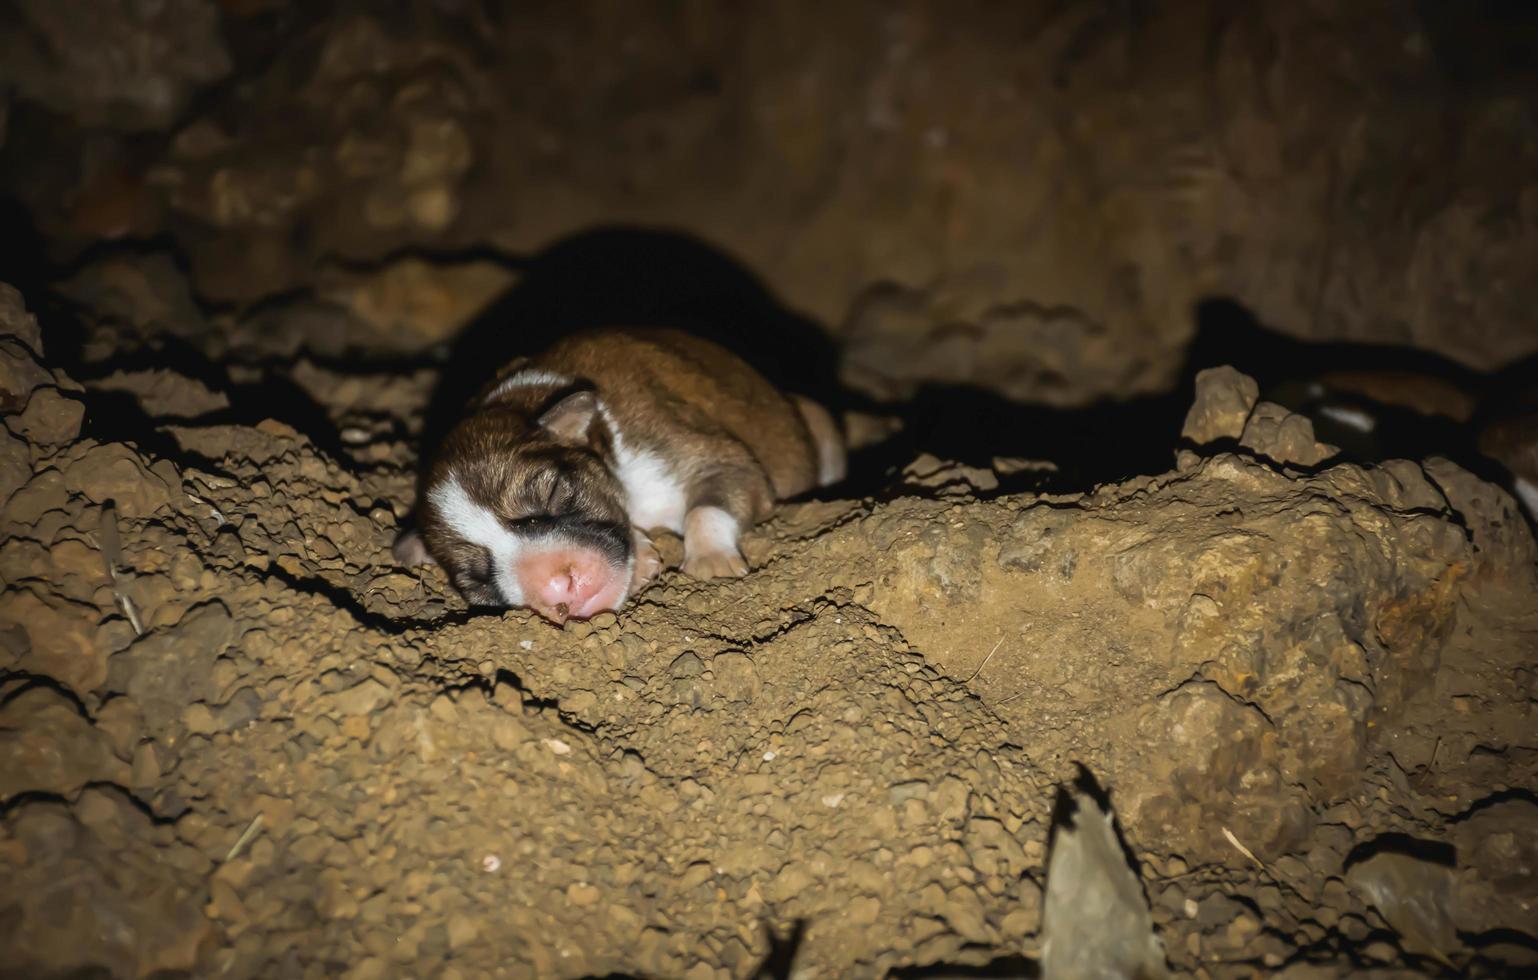 The rebirth of a puppy in a burrow photo